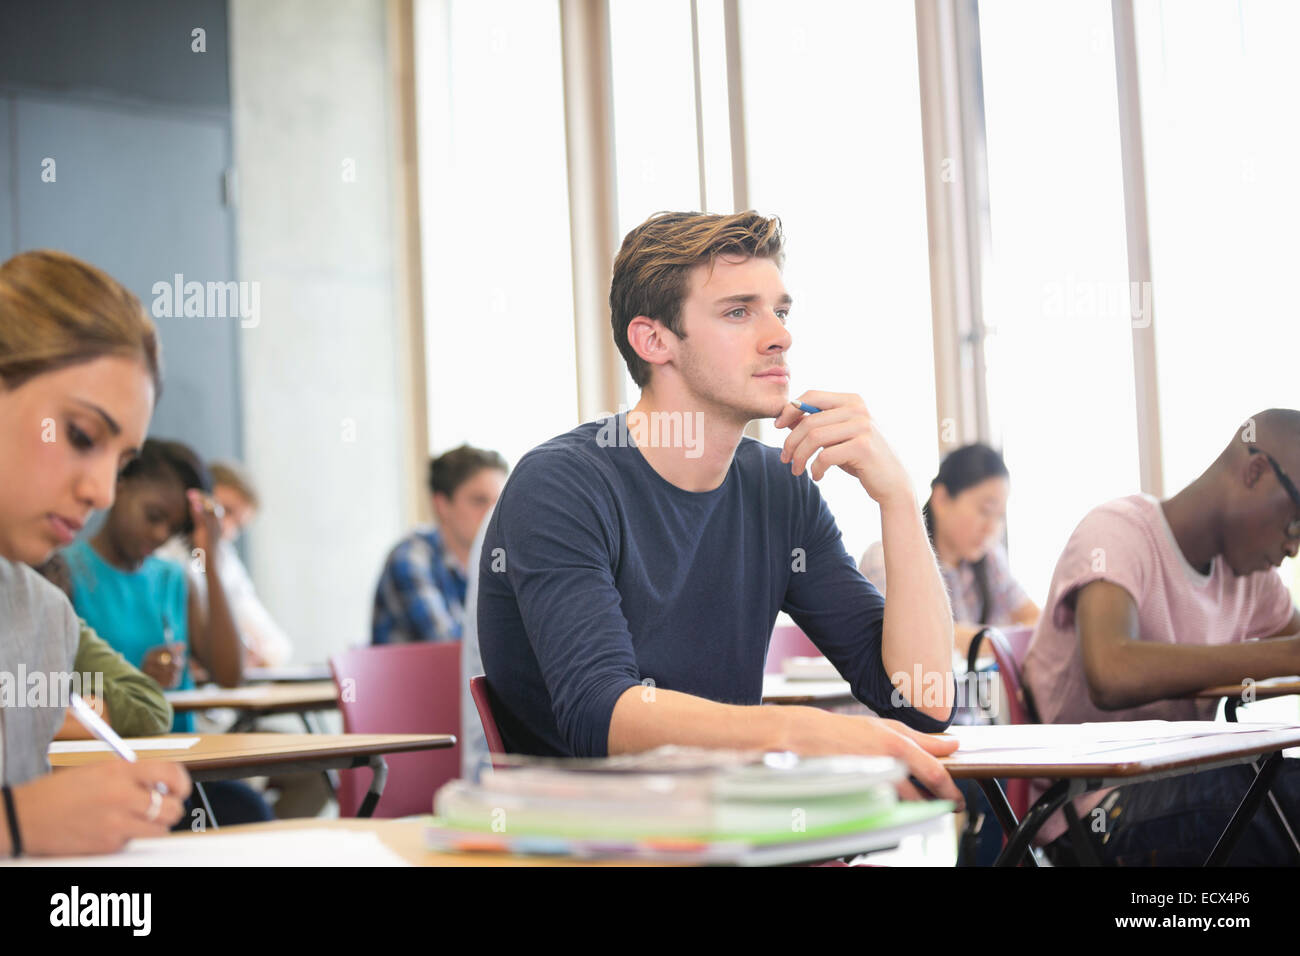 Male student with hand on chin during lecture with other students in background Stock Photo